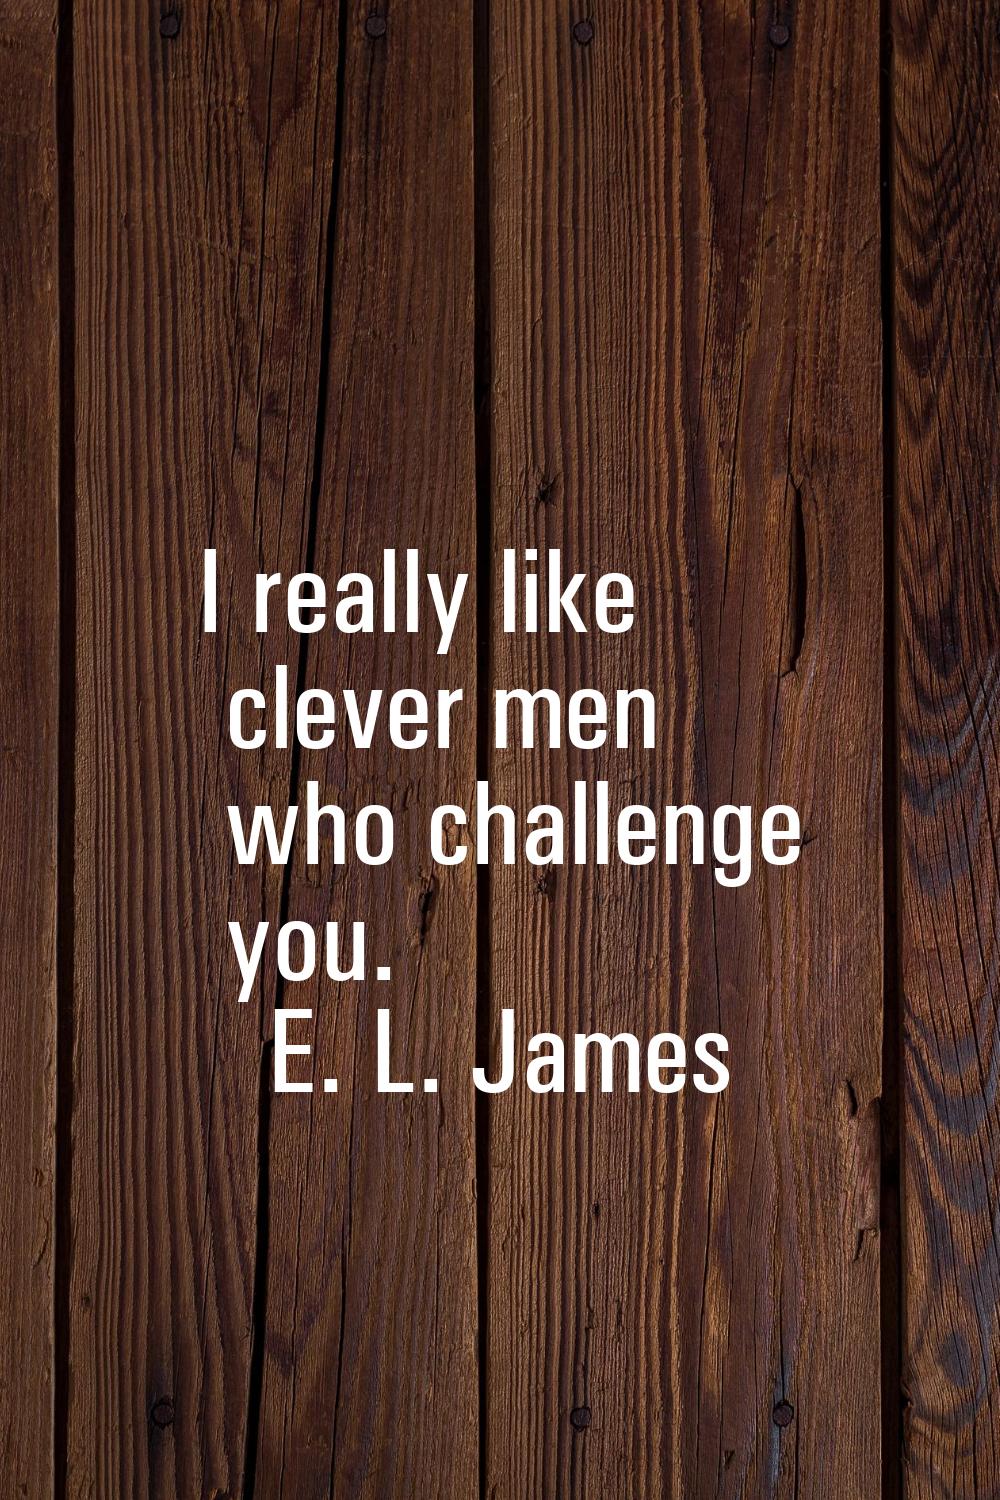 I really like clever men who challenge you.